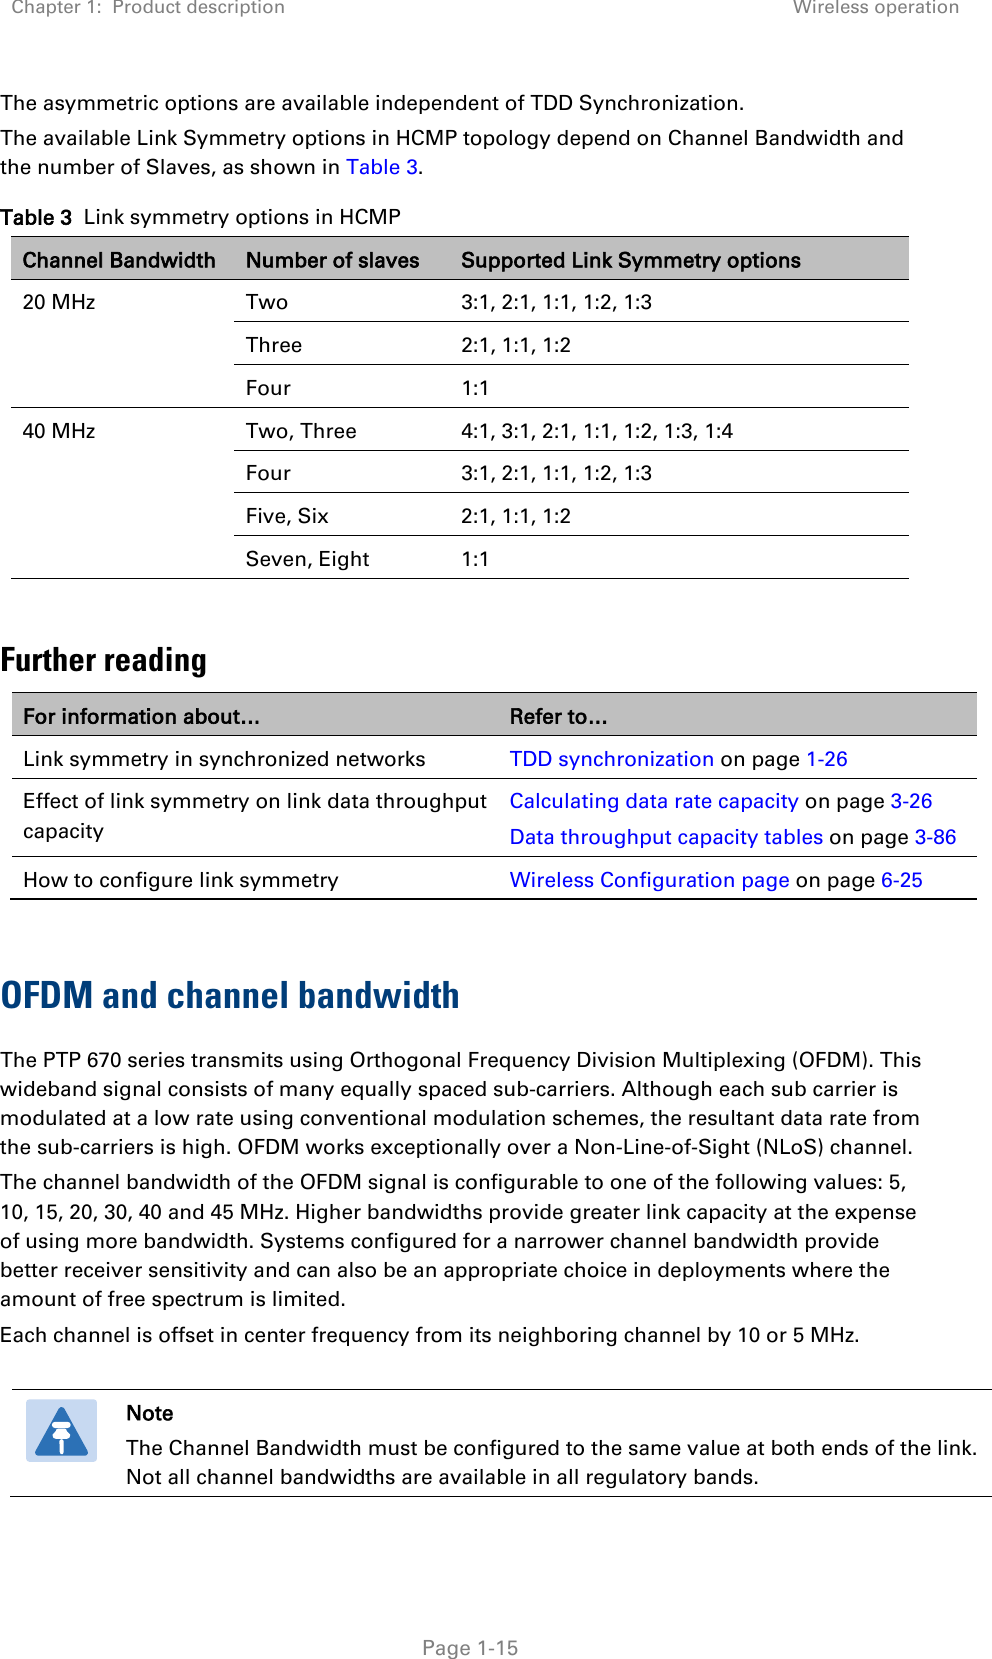 Chapter 1:  Product description Wireless operation   Page 1-15 The asymmetric options are available independent of TDD Synchronization. The available Link Symmetry options in HCMP topology depend on Channel Bandwidth and the number of Slaves, as shown in Table 3. Table 3  Link symmetry options in HCMP Channel Bandwidth Number of slaves Supported Link Symmetry options 20 MHz Two 3:1, 2:1, 1:1, 1:2, 1:3 Three  2:1, 1:1, 1:2 Four  1:1 40 MHz Two, Three 4:1, 3:1, 2:1, 1:1, 1:2, 1:3, 1:4 Four  3:1, 2:1, 1:1, 1:2, 1:3 Five, Six 2:1, 1:1, 1:2 Seven, Eight 1:1  Further reading For information about… Refer to… Link symmetry in synchronized networks TDD synchronization on page 1-26 Effect of link symmetry on link data throughput capacity Calculating data rate capacity on page 3-26 Data throughput capacity tables on page 3-86 How to configure link symmetry Wireless Configuration page on page 6-25  OFDM and channel bandwidth The PTP 670 series transmits using Orthogonal Frequency Division Multiplexing (OFDM). This wideband signal consists of many equally spaced sub-carriers. Although each sub carrier is modulated at a low rate using conventional modulation schemes, the resultant data rate from the sub-carriers is high. OFDM works exceptionally over a Non-Line-of-Sight (NLoS) channel.  The channel bandwidth of the OFDM signal is configurable to one of the following values: 5, 10, 15, 20, 30, 40 and 45 MHz. Higher bandwidths provide greater link capacity at the expense of using more bandwidth. Systems configured for a narrower channel bandwidth provide better receiver sensitivity and can also be an appropriate choice in deployments where the amount of free spectrum is limited. Each channel is offset in center frequency from its neighboring channel by 10 or 5 MHz.   Note The Channel Bandwidth must be configured to the same value at both ends of the link. Not all channel bandwidths are available in all regulatory bands.  